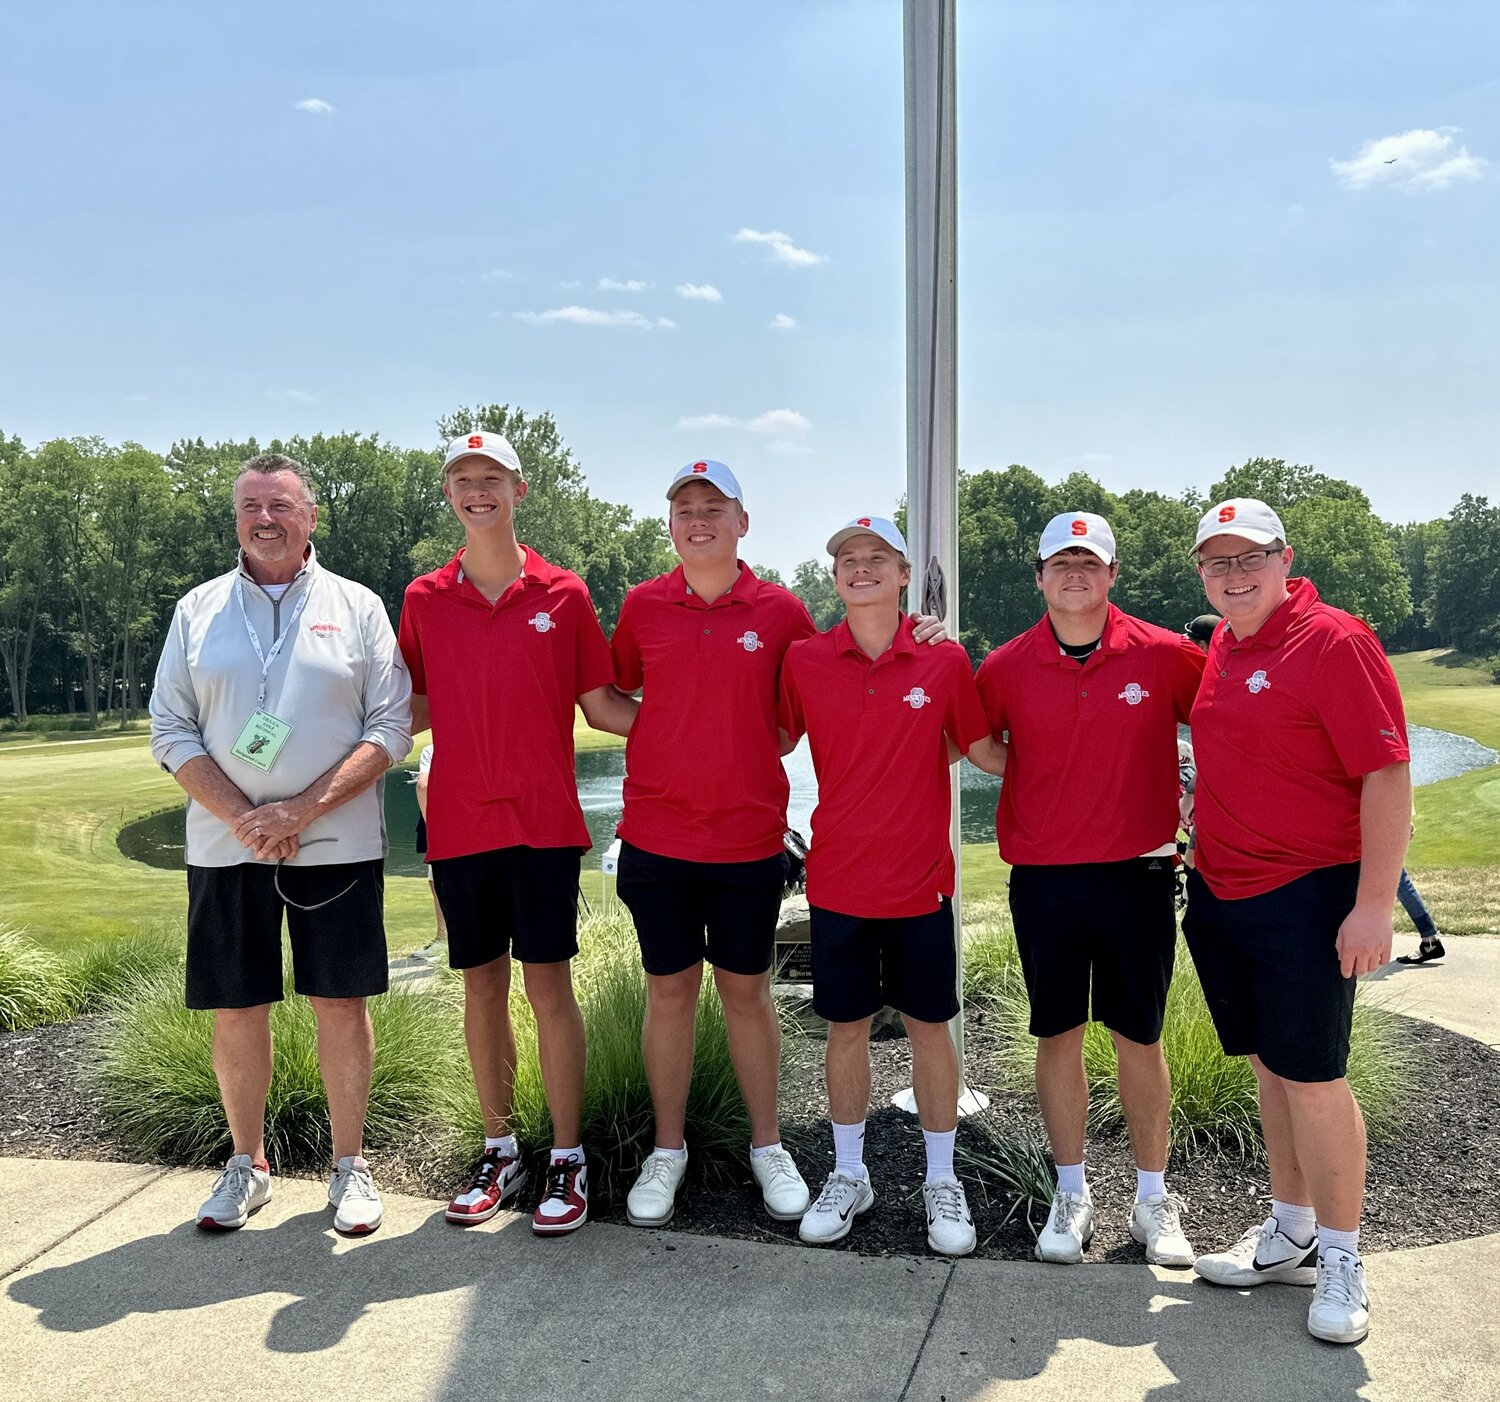 The Southmont Mounties ended the season as county champions and will say goodbye to three seniors in Nolan Allen, Luke Tesmer, and Harrison Haddock.